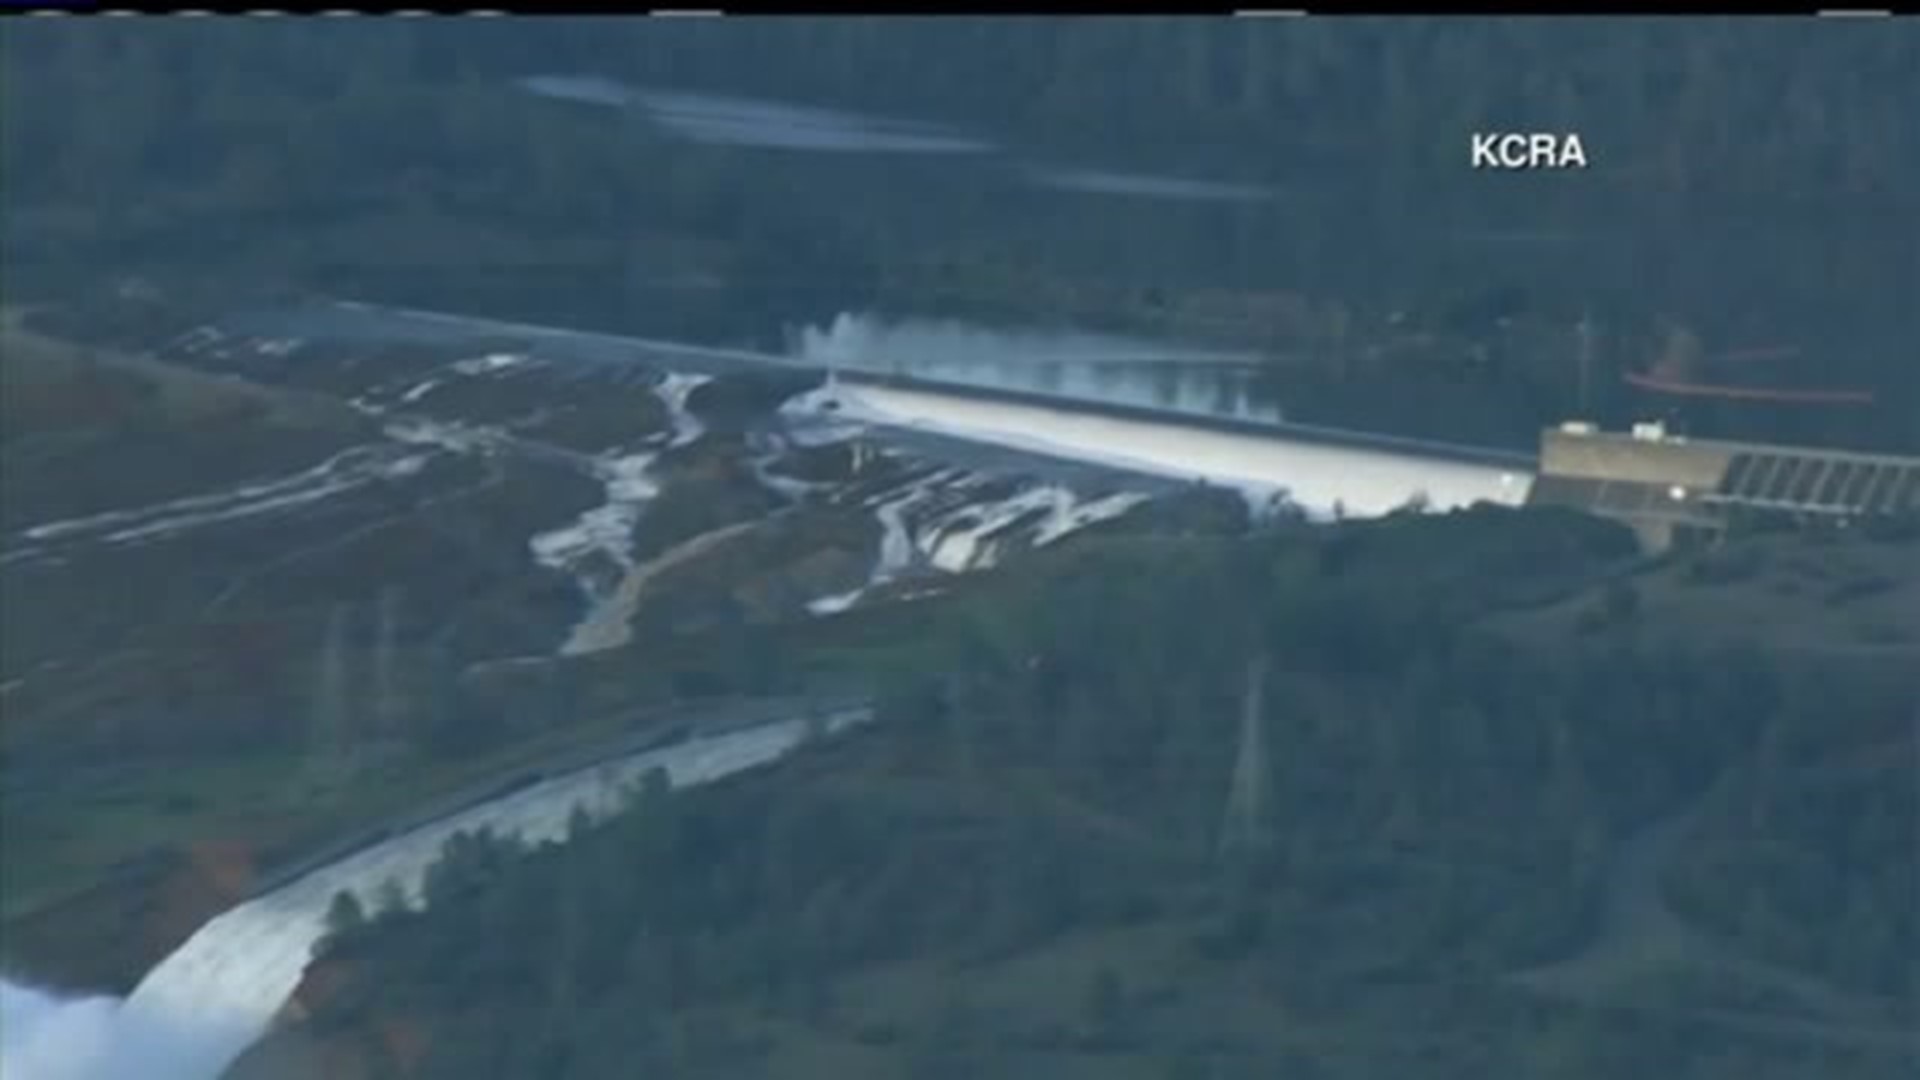 Evacuations ordered over concerns at California dam system